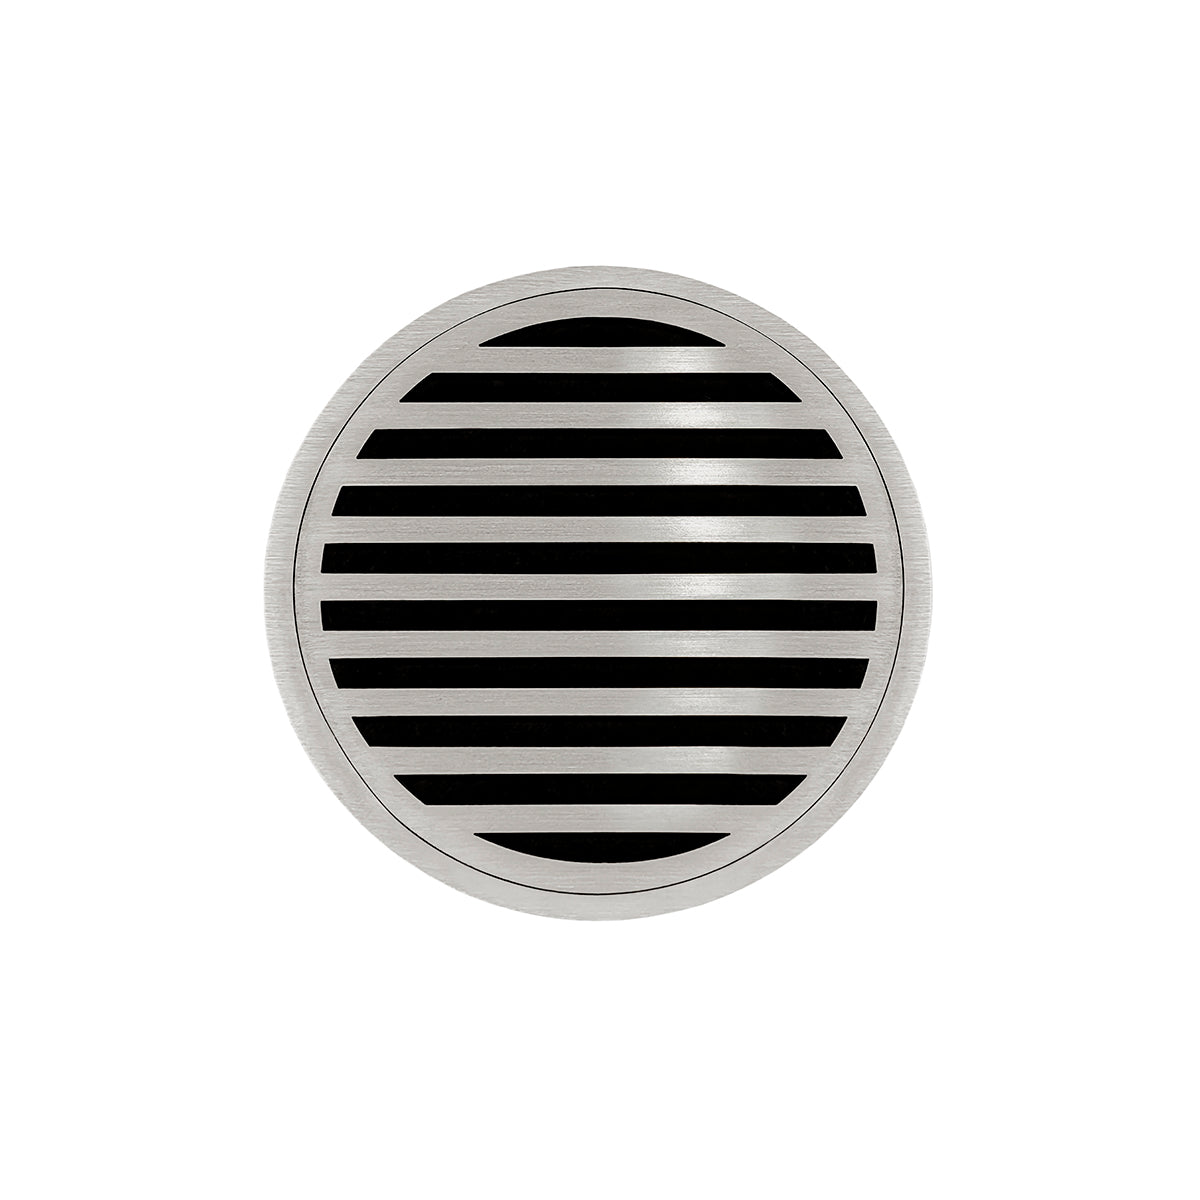 Infinity Drain 5" Round RND 5 High Flow Premium Center Drain Kit with Lines Pattern Decorative Plate with ABS Drain Body, 3" Outlet